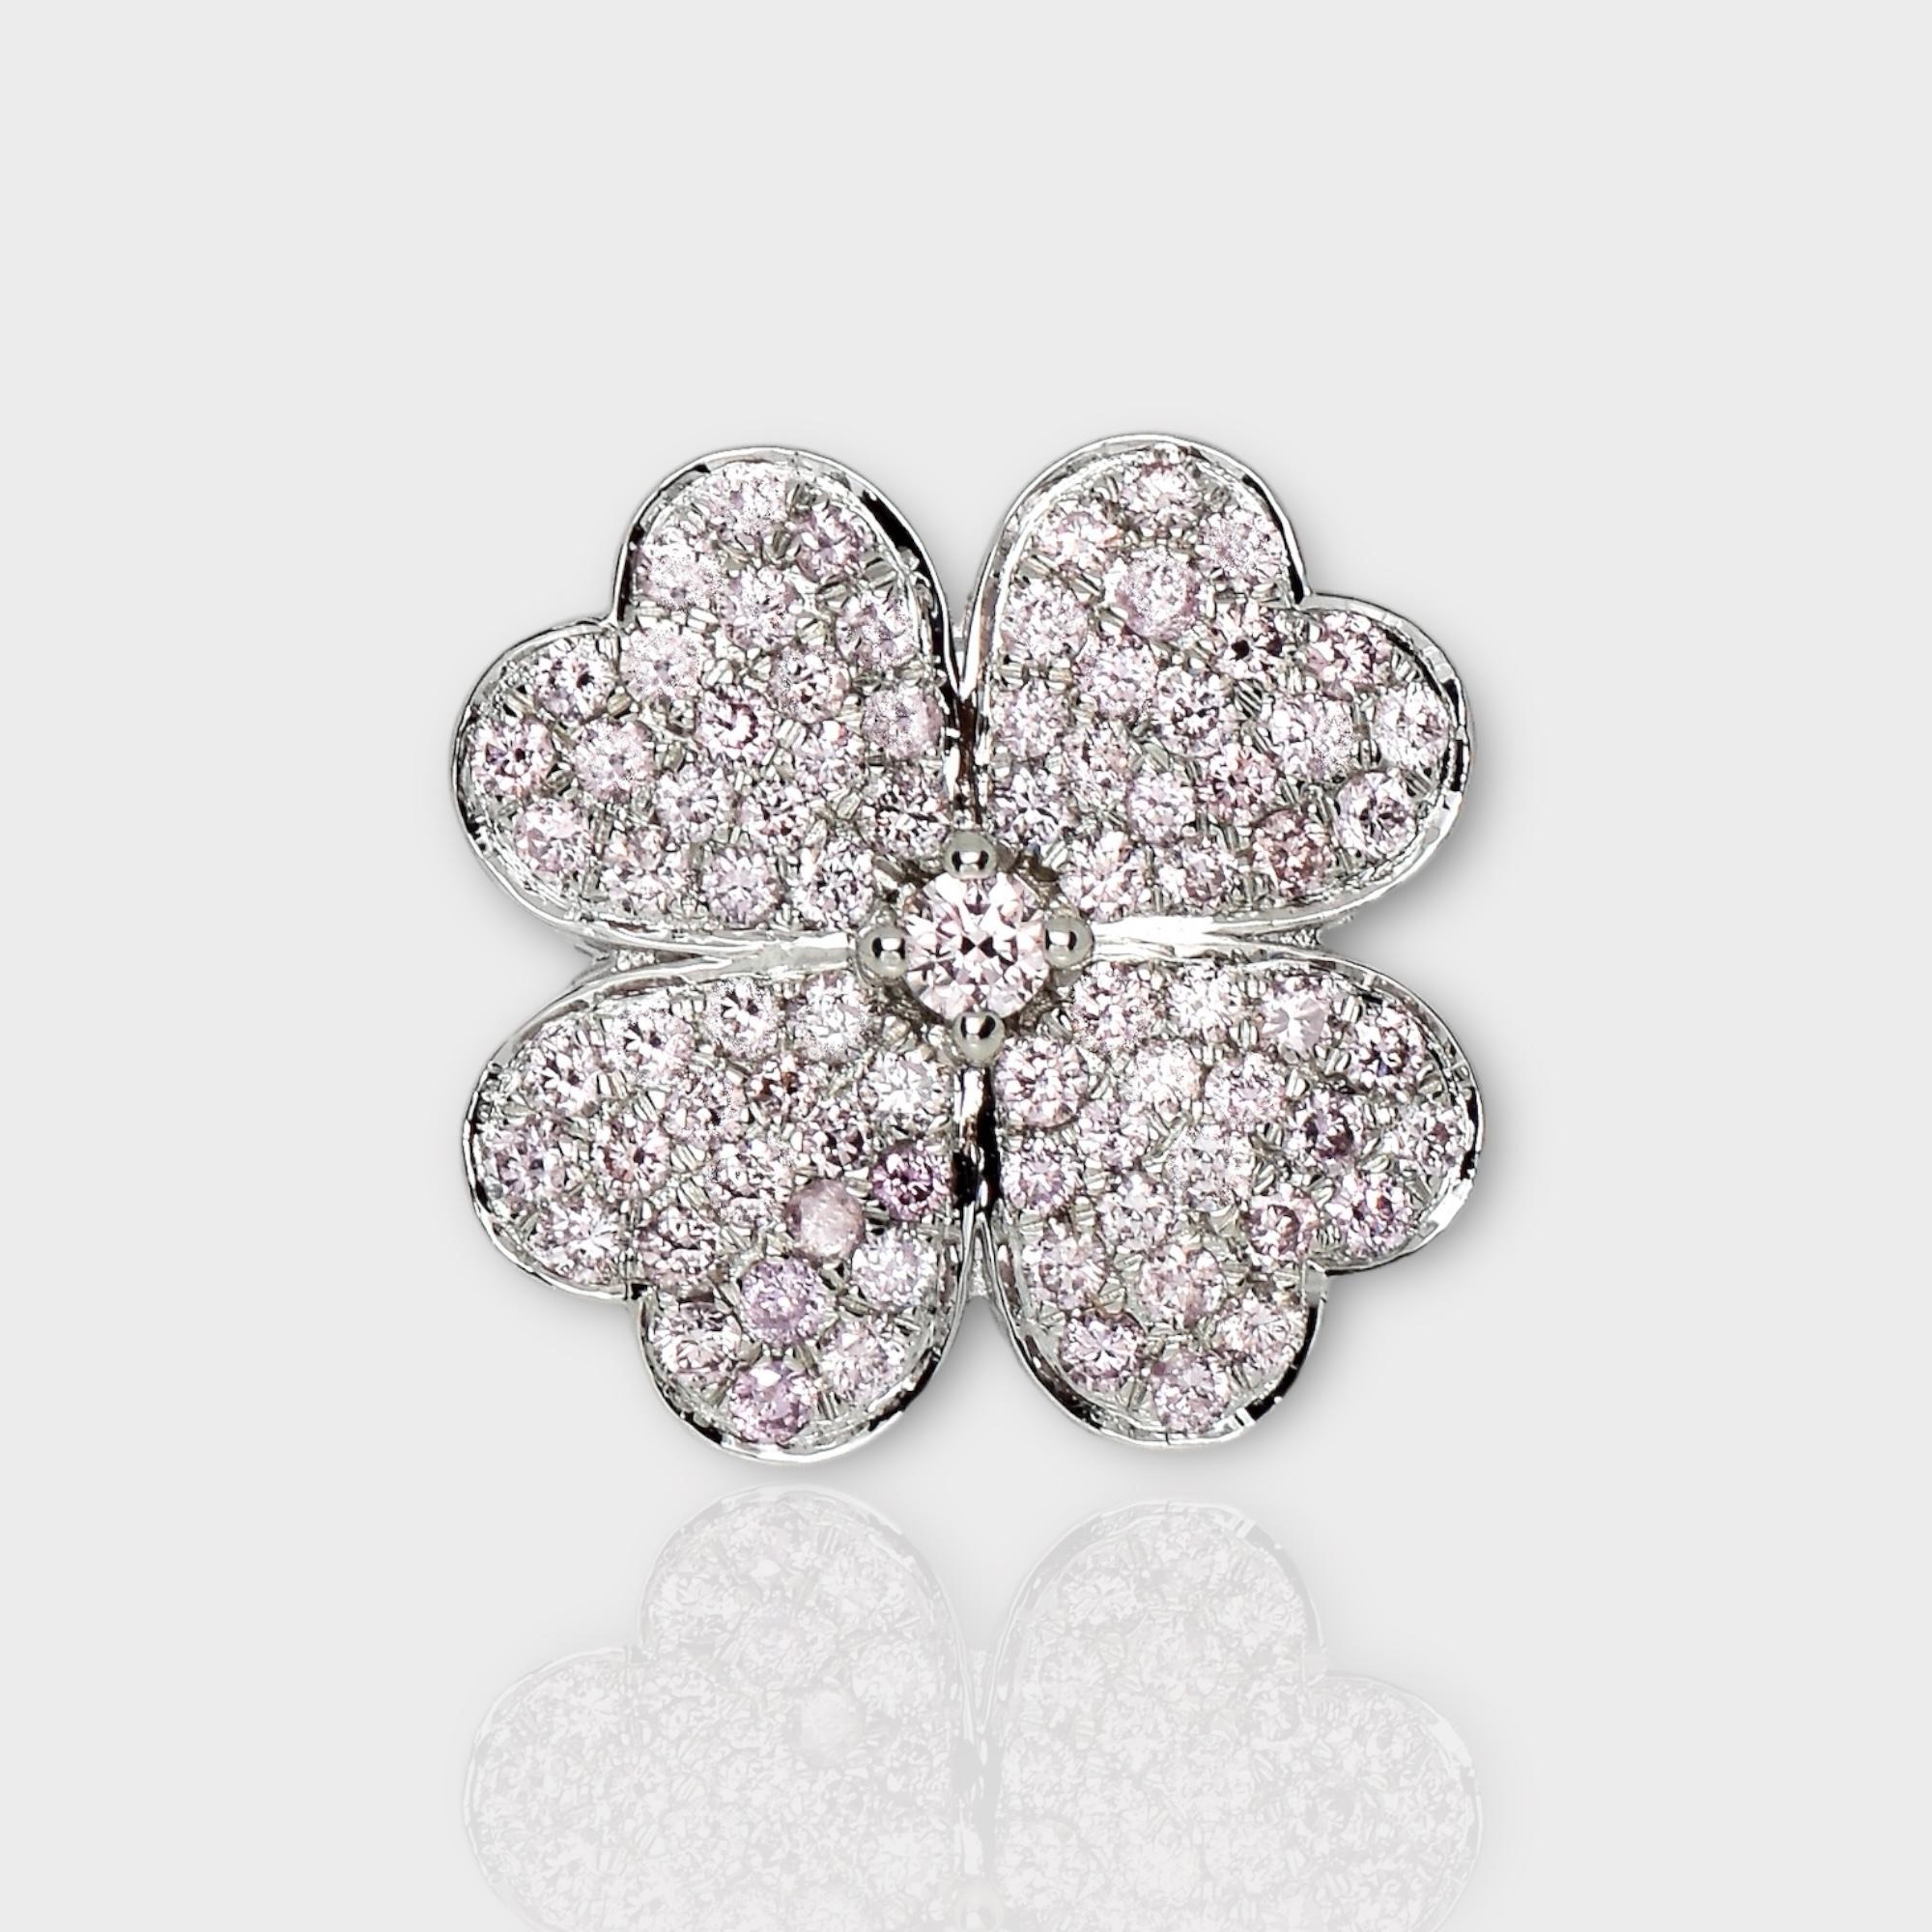 *IGI 14K 0.97 ct Natural Pink Diamonds Lucky Clover Antique Design Ring*

This band features a stunning design with a 4-leaf clover crafted from 14K white gold. It is set with natural pink diamonds weighing 0.97 carats.

This ring features colorful